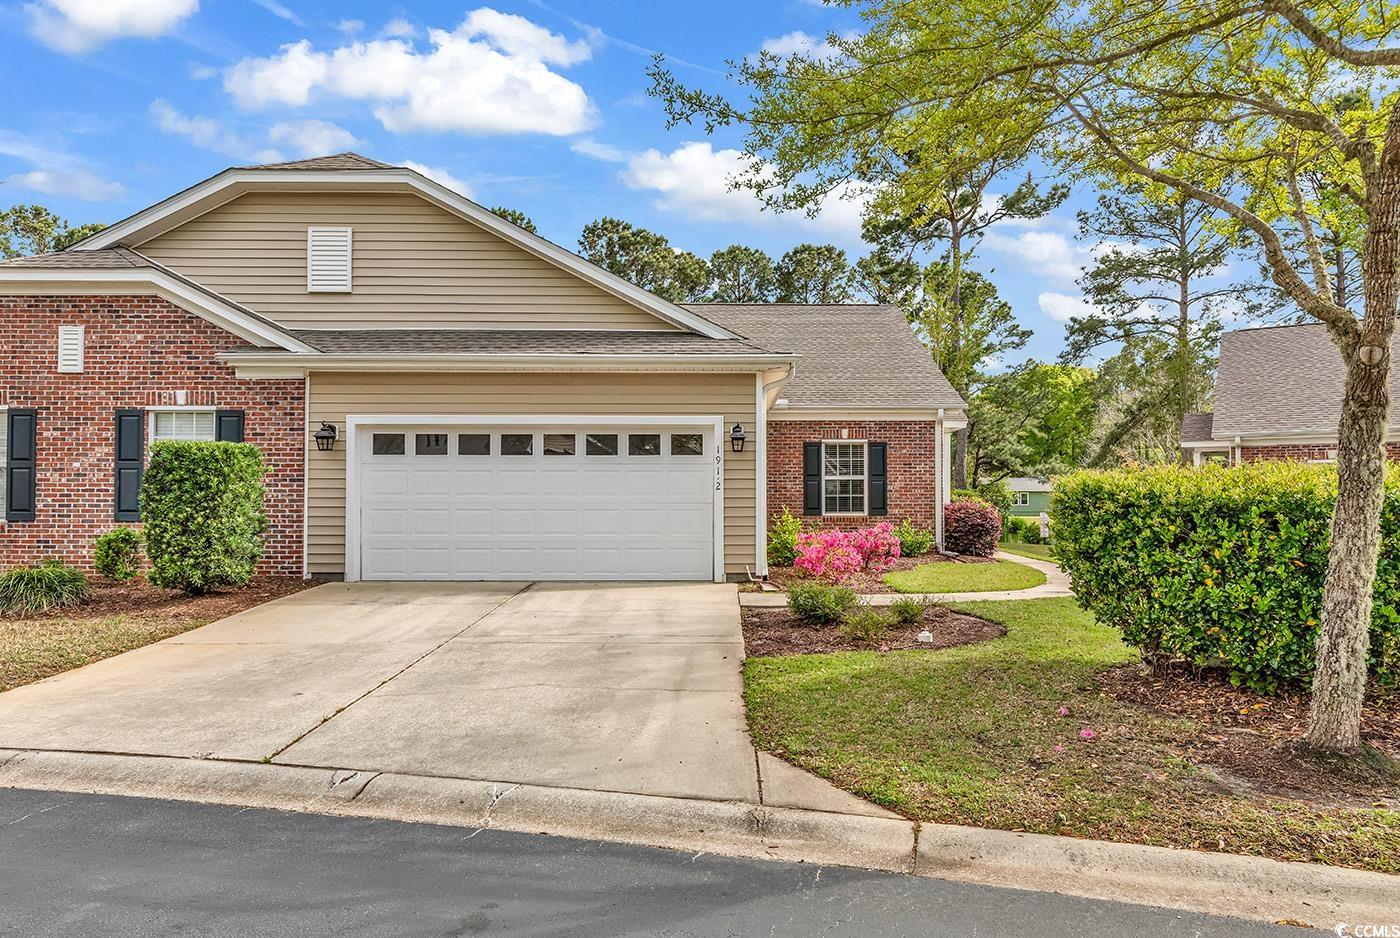 conveniently located in pawleys island. two bedroom, two bath overlooking pond. upgrades include new roof 2022. made screened porch addition 2007/2008. there is a community pool. see rental stipulations in the rules & regulations.